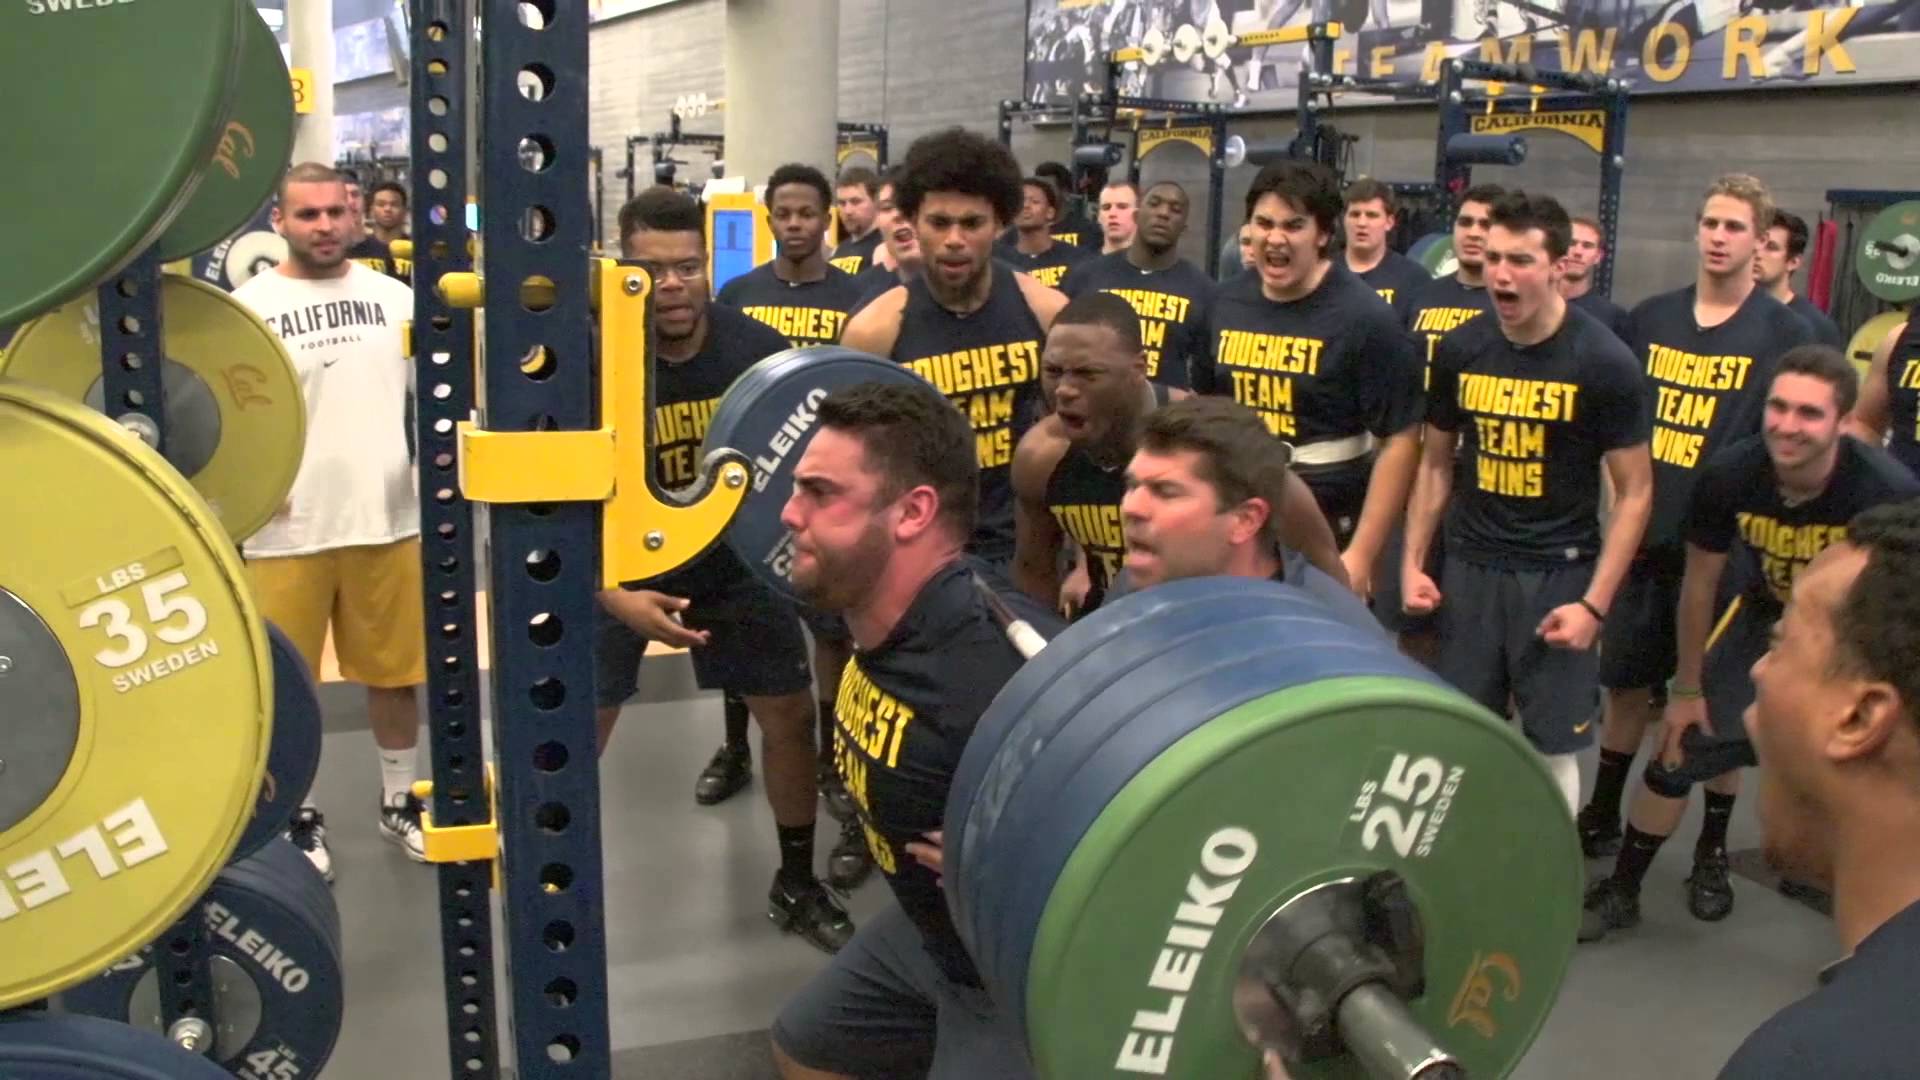 Cal Football: Strength and Conditioning Testing Week - YouTube